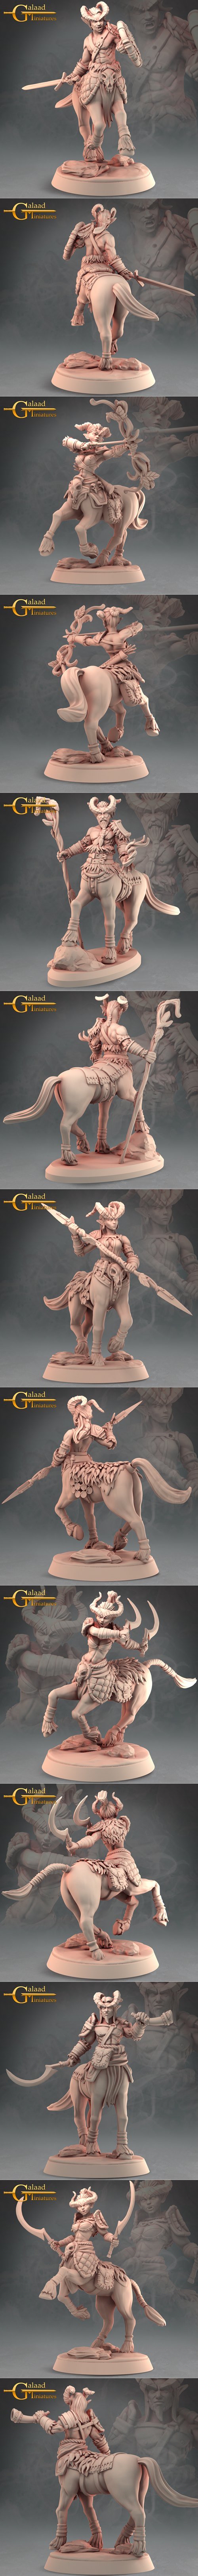 Into The Woods - Centaurs – 3D Printable STL